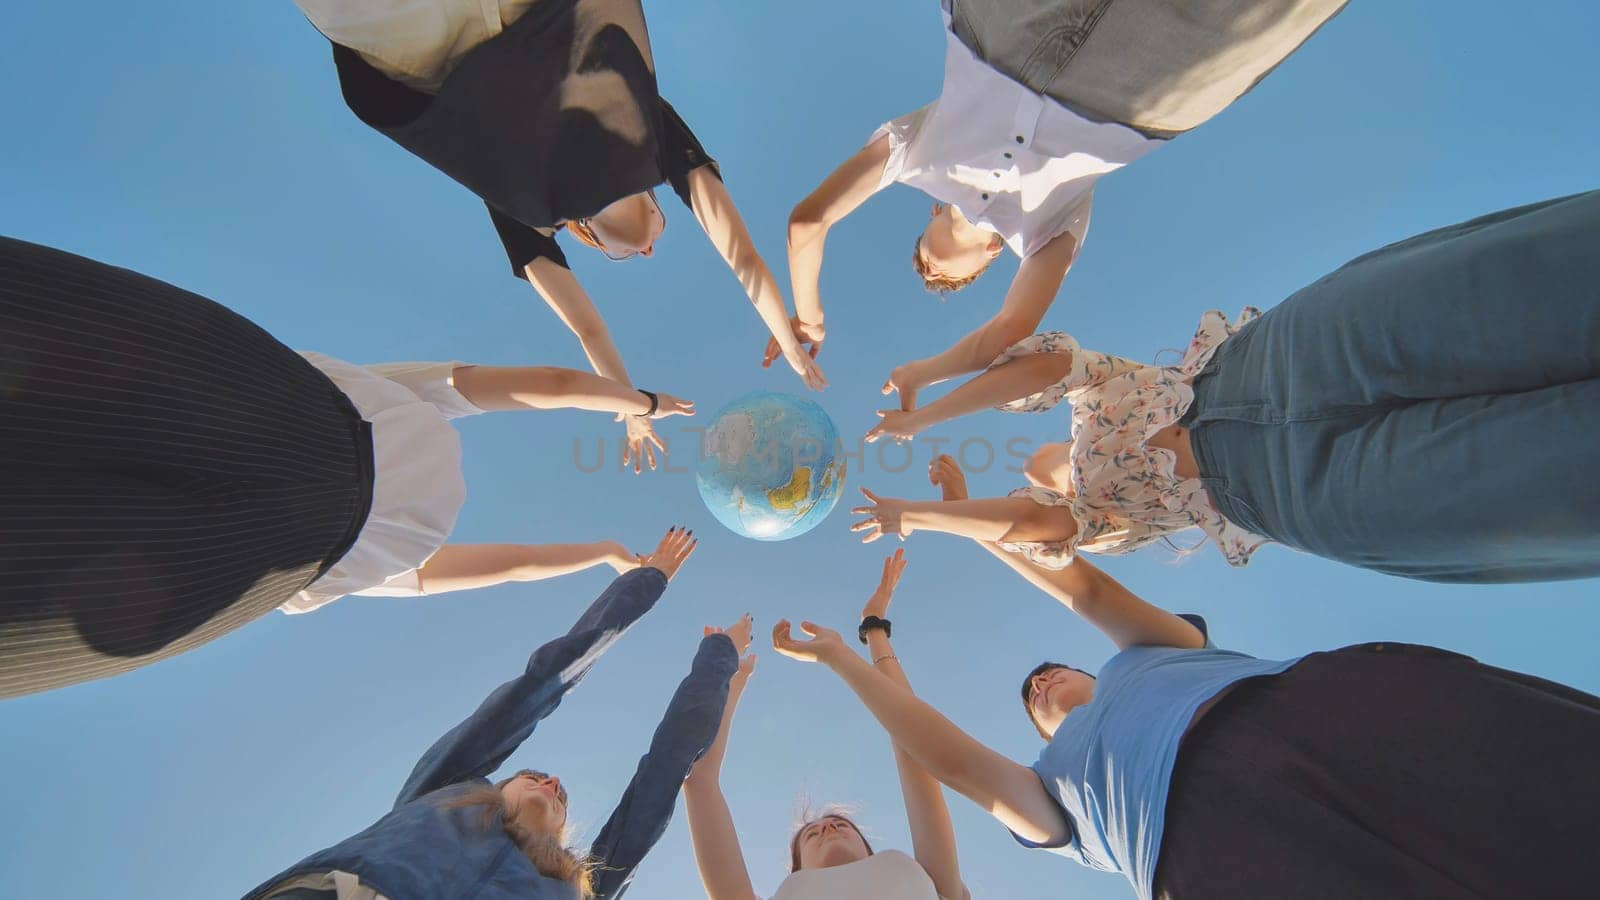 Friends hold and toss a geographic globe in their hands. The concept of keeping the world safe